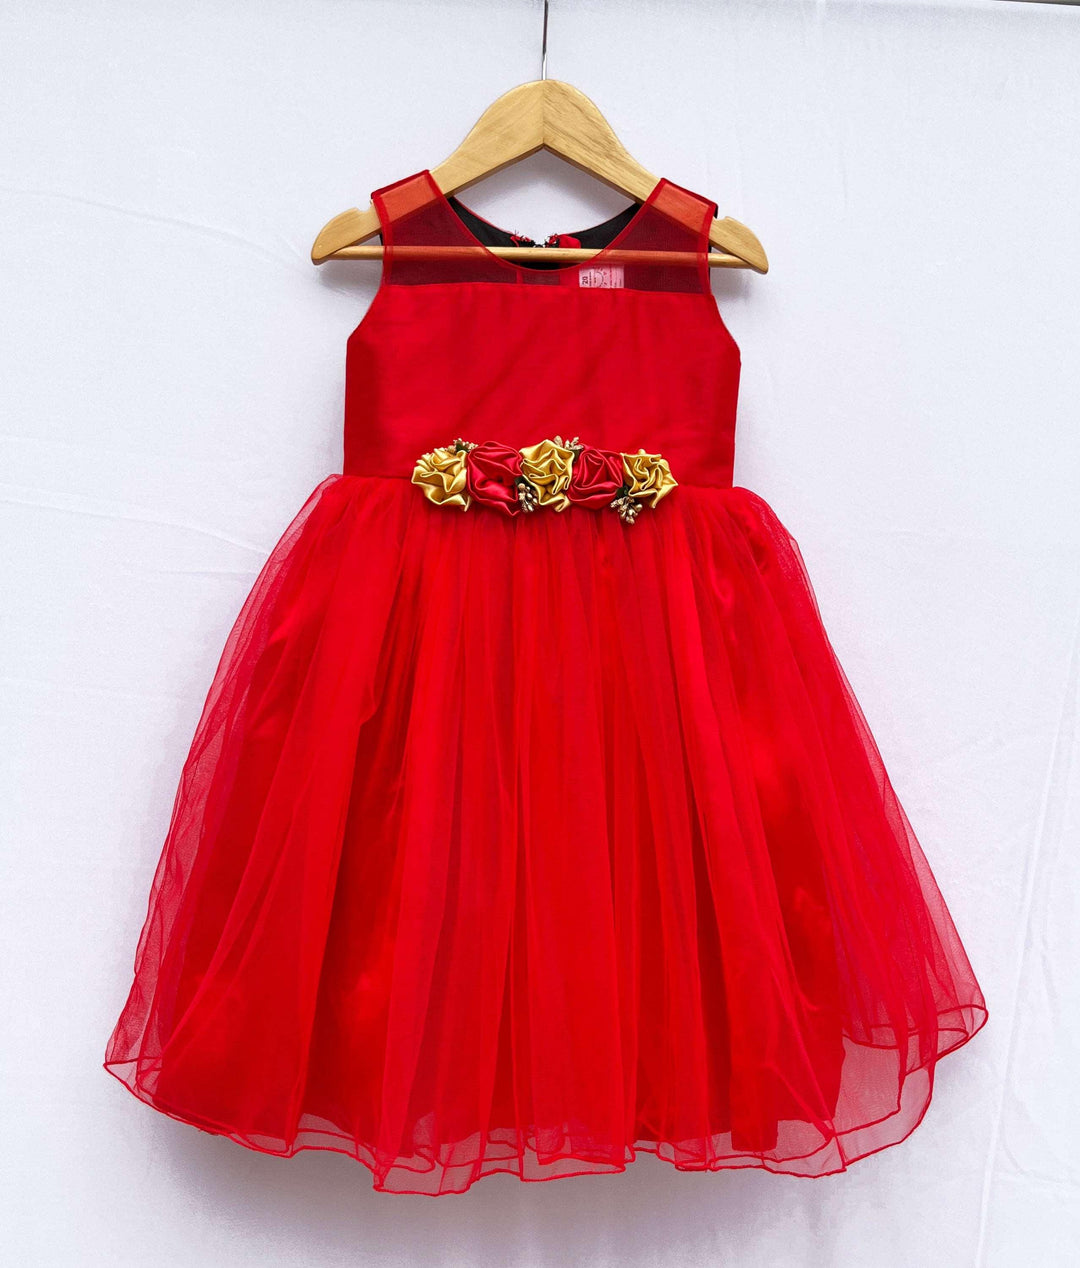 Red Colour Designer Flower Frock
Fabric:  Red shade  mono net with green and golden mix flowers on the centre portion.  Neck is designed in Transparent pattern. Beautifully designed outfit for Baby